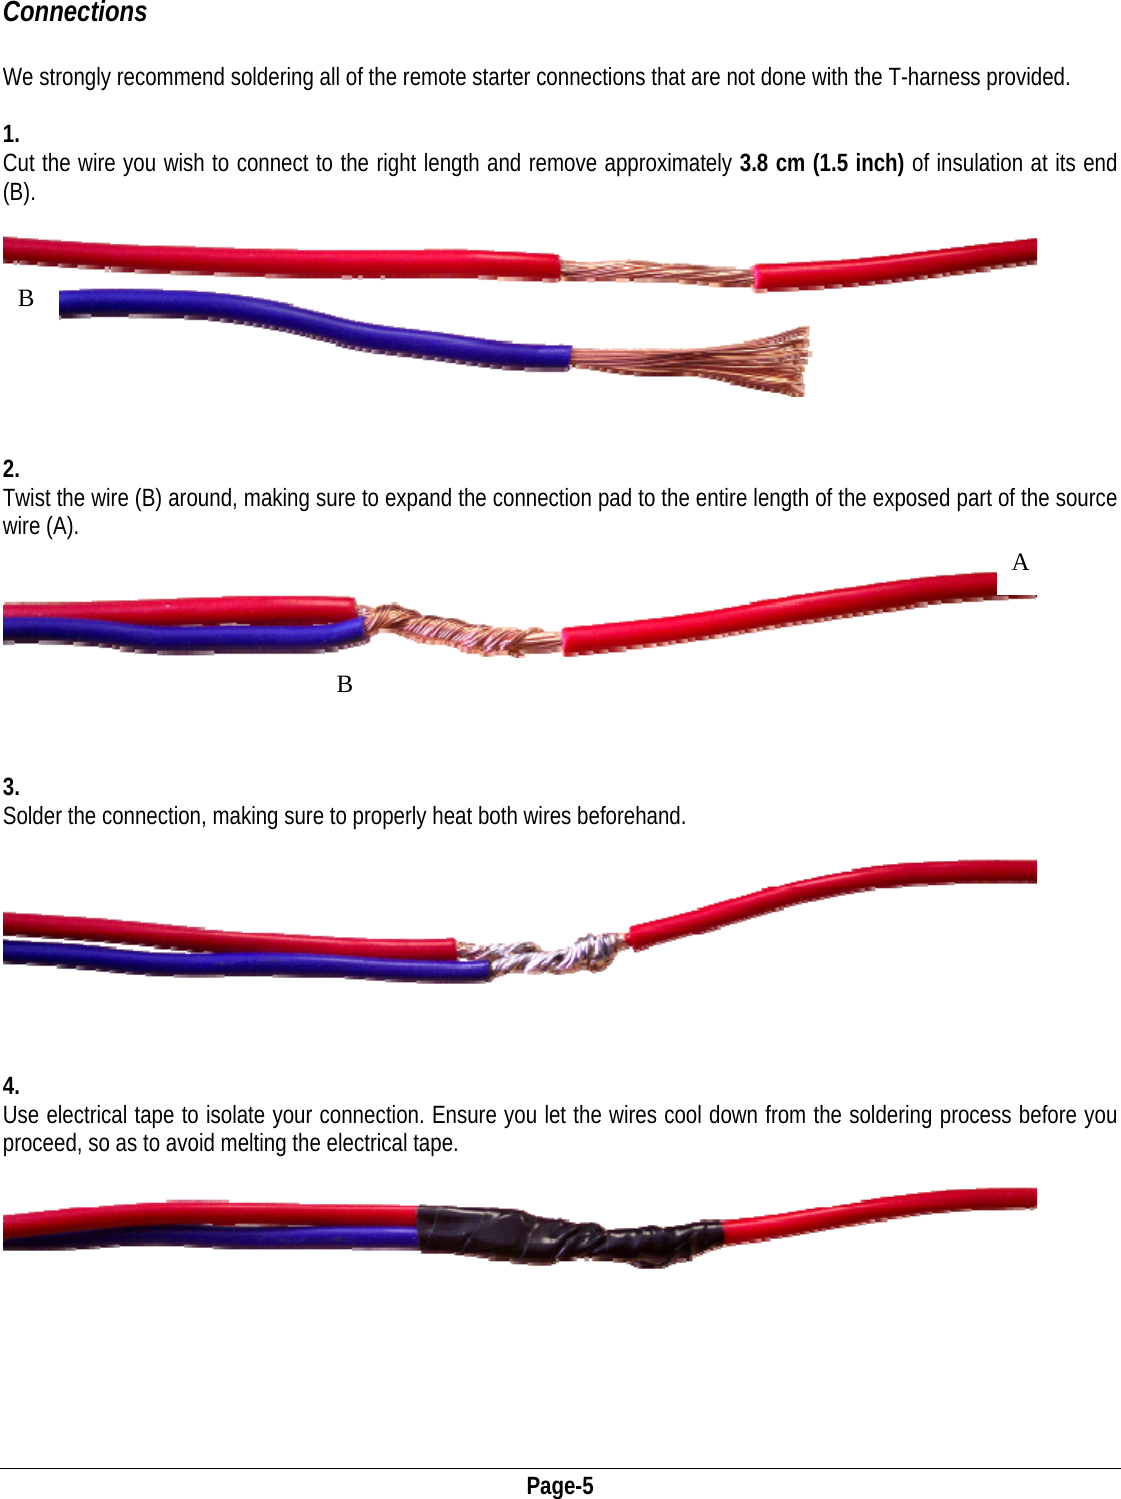  Page-5 Connections  We strongly recommend soldering all of the remote starter connections that are not done with the T-harness provided.   1. Cut the wire you wish to connect to the right length and remove approximately 3.8 cm (1.5 inch) of insulation at its end (B).      2. Twist the wire (B) around, making sure to expand the connection pad to the entire length of the exposed part of the source wire (A).      B B A  3. Solder the connection, making sure to properly heat both wires beforehand.      4. Use electrical tape to isolate your connection. Ensure you let the wires cool down from the soldering process before you proceed, so as to avoid melting the electrical tape.  